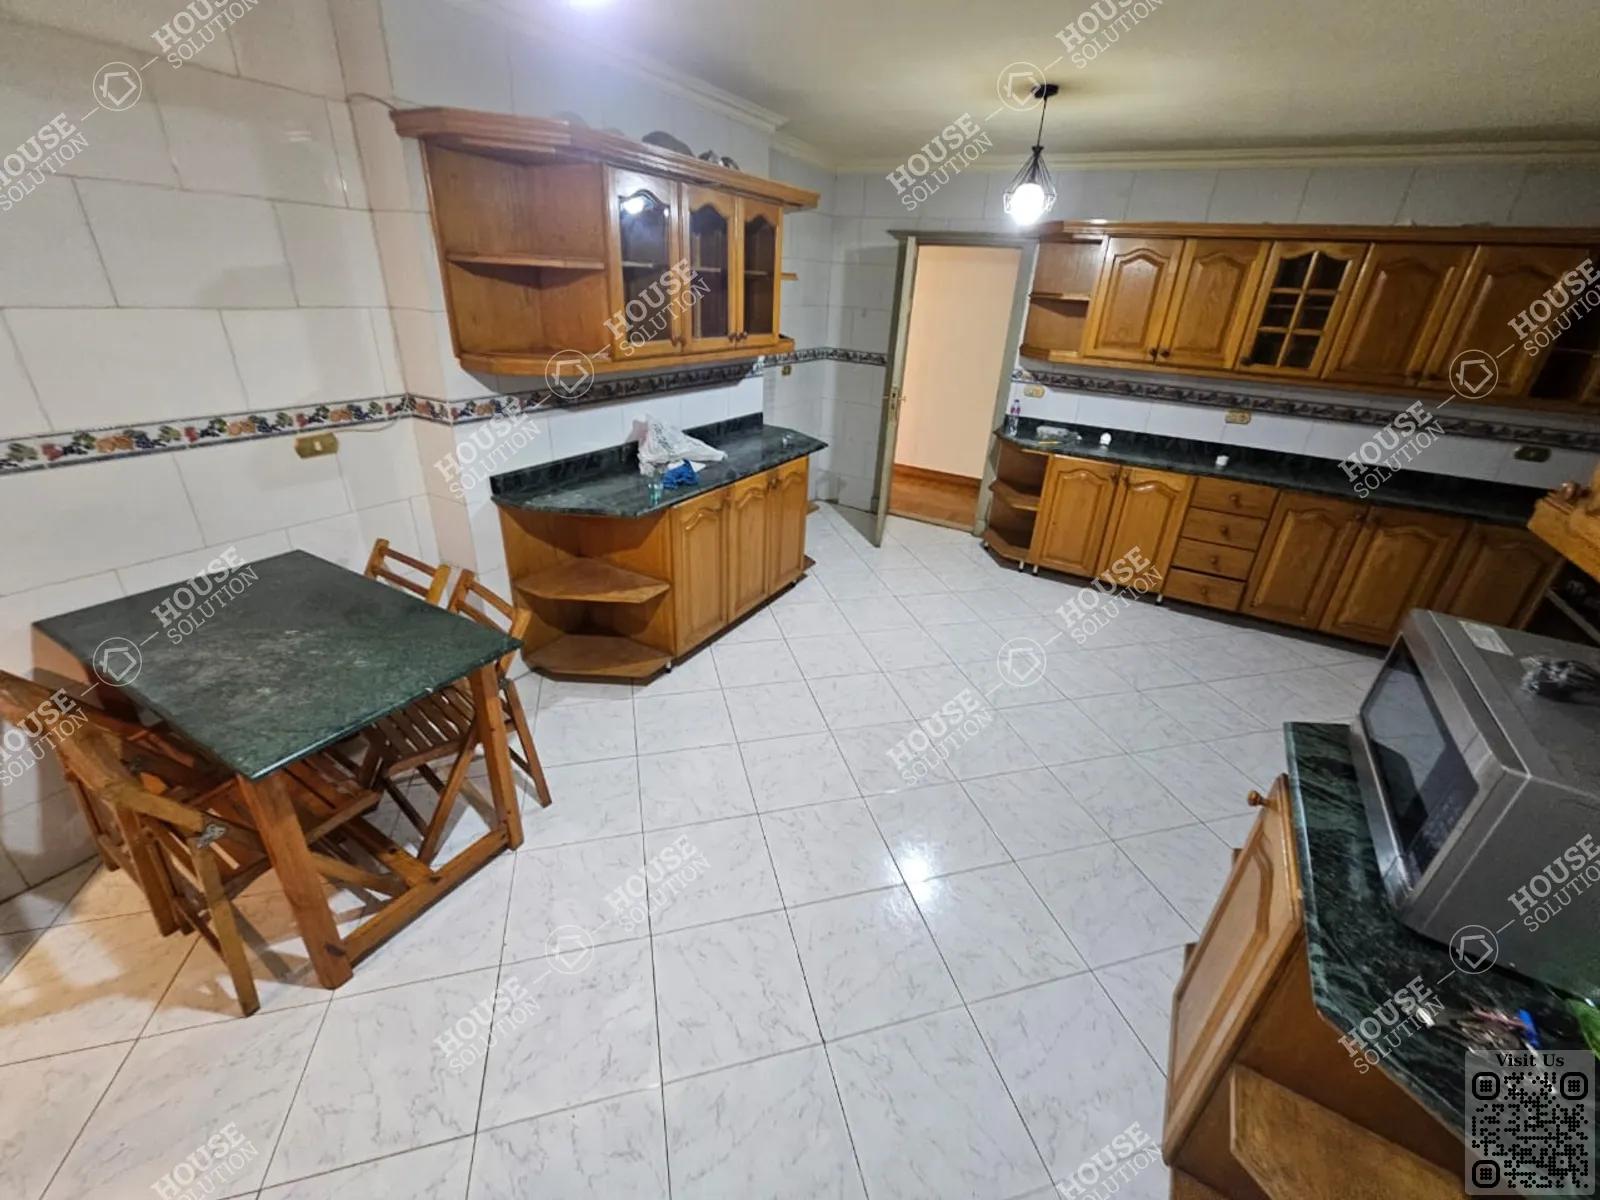 KITCHEN  @ Apartments For Rent In Maadi Maadi Sarayat Area: 325 m² consists of 4 Bedrooms 3 Bathrooms Furnished 5 stars #4015-1